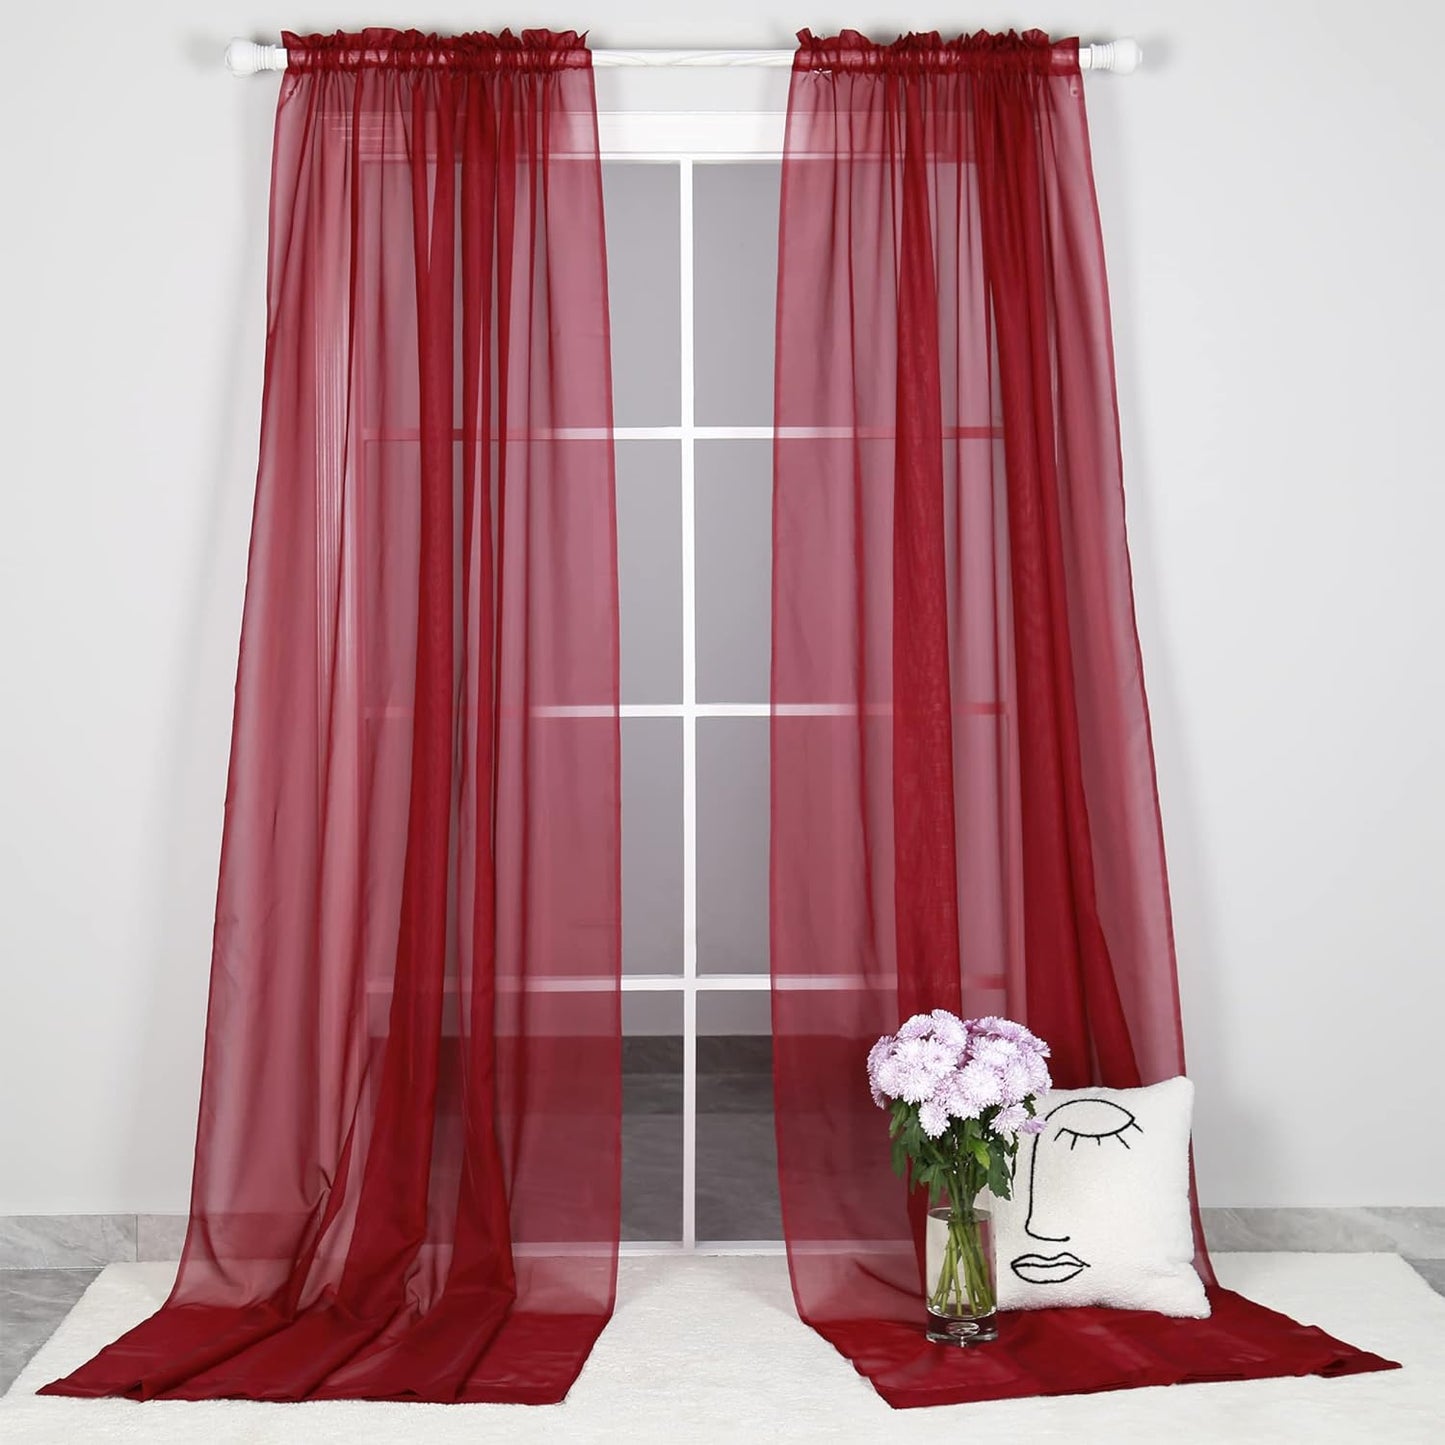 Dulcidee White Sheer Curtains 84 Inches Long 2 Panels Set - Lightweight and Light Filtering Elegant Rod Pocket Voile Window Sheer White Drapes for Bedroom/Living Room,2Pcs  DULCIDEE Burgundy 59W X 120L | 2 Panels 